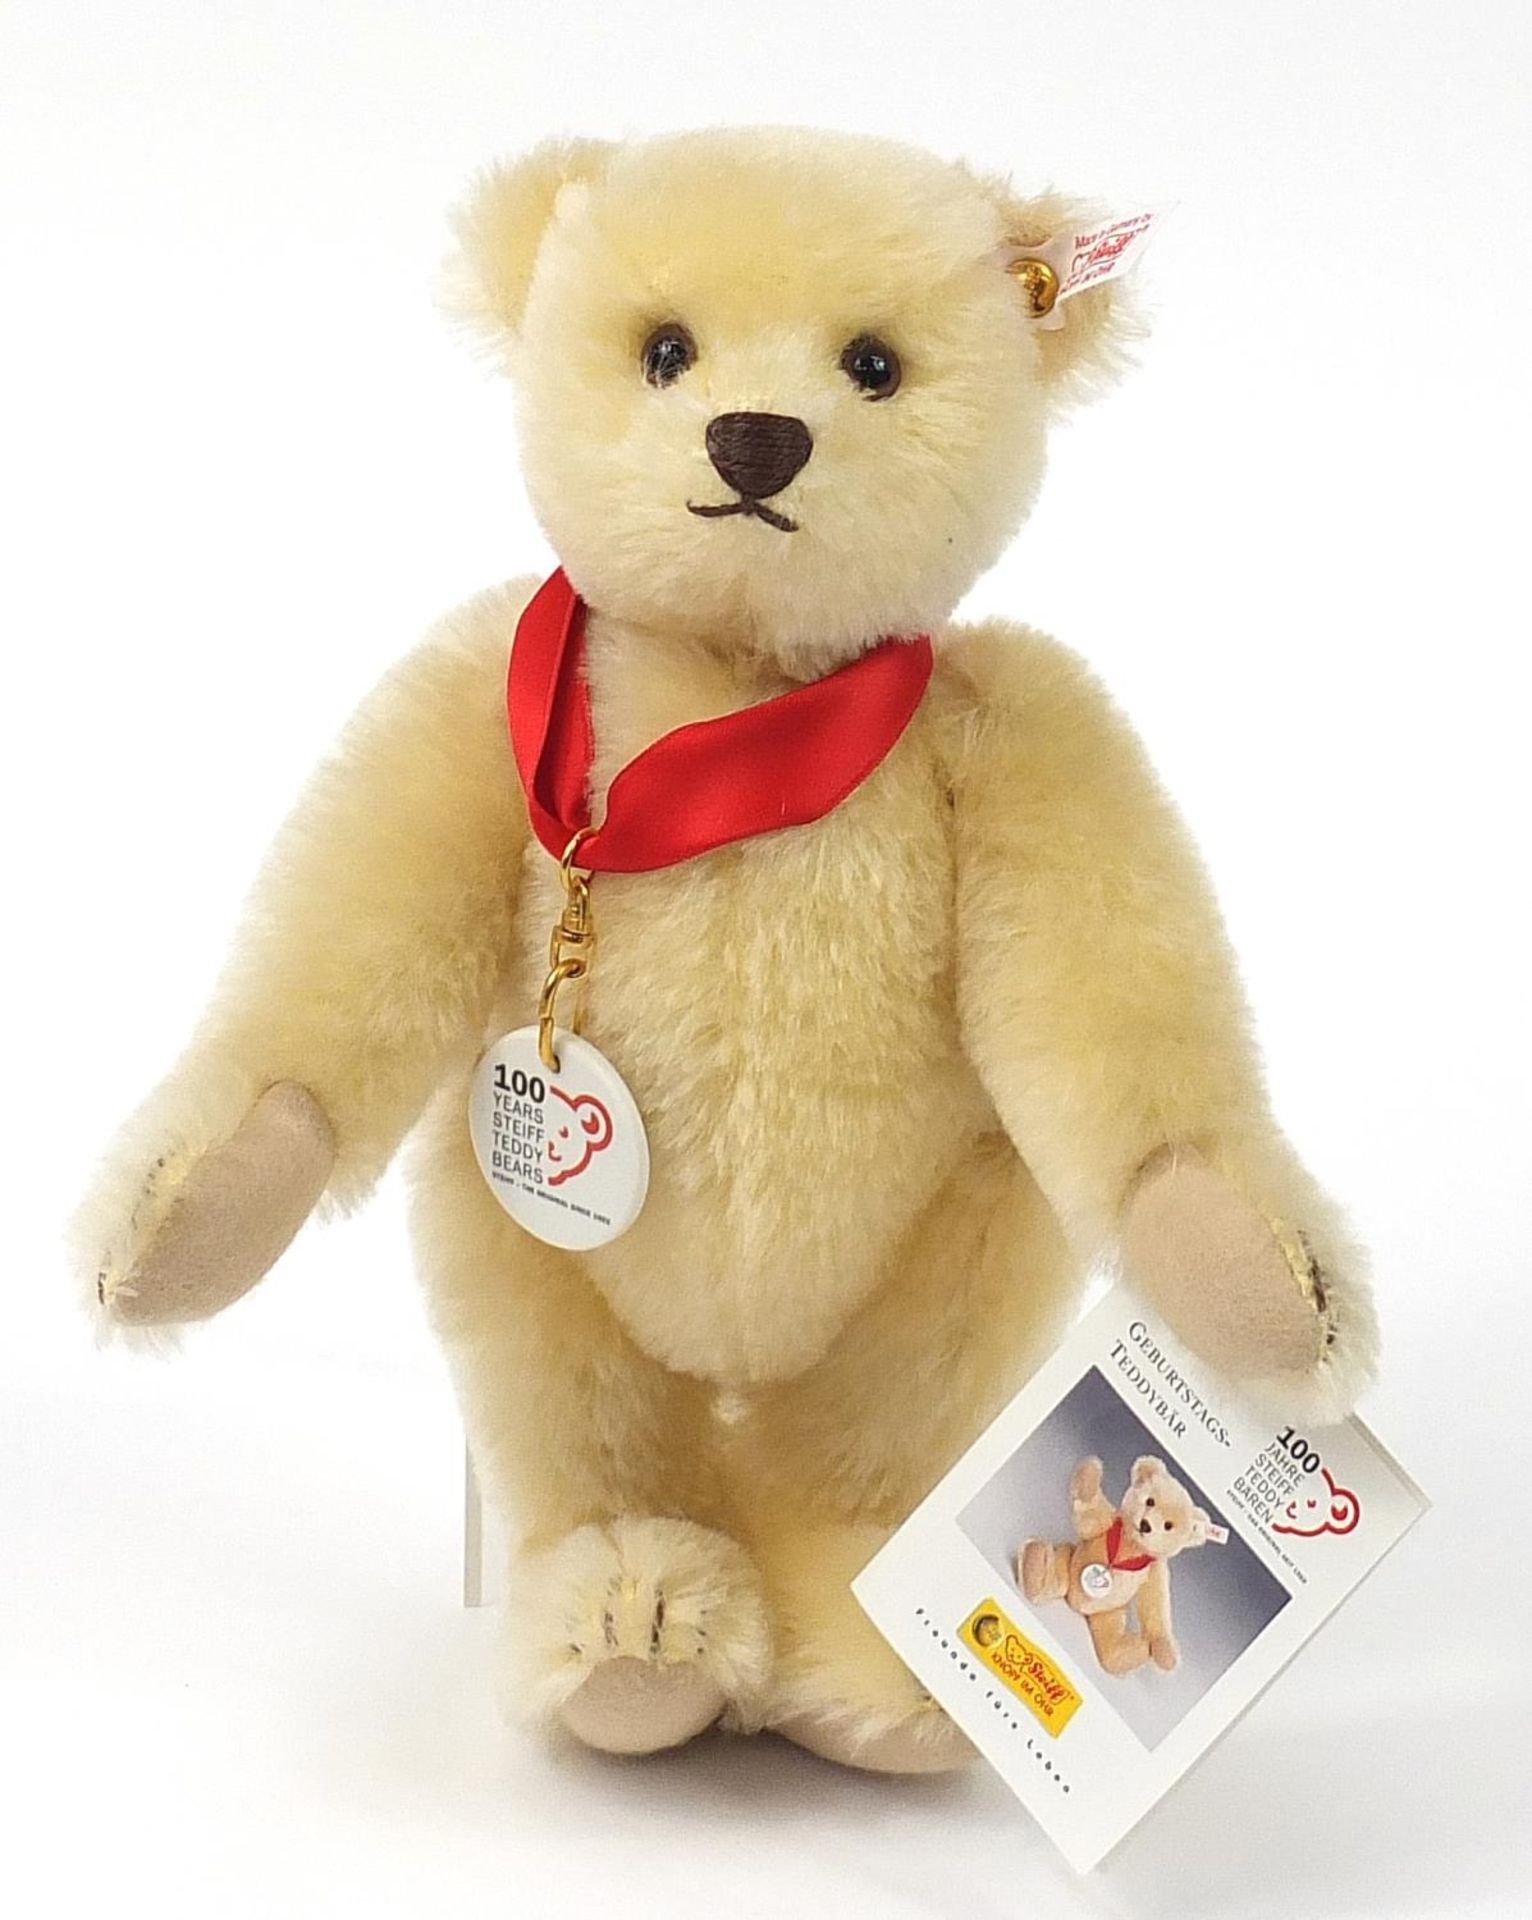 Steiff 100 year commemorative bear numbered 04912, 26cm high - Image 2 of 5